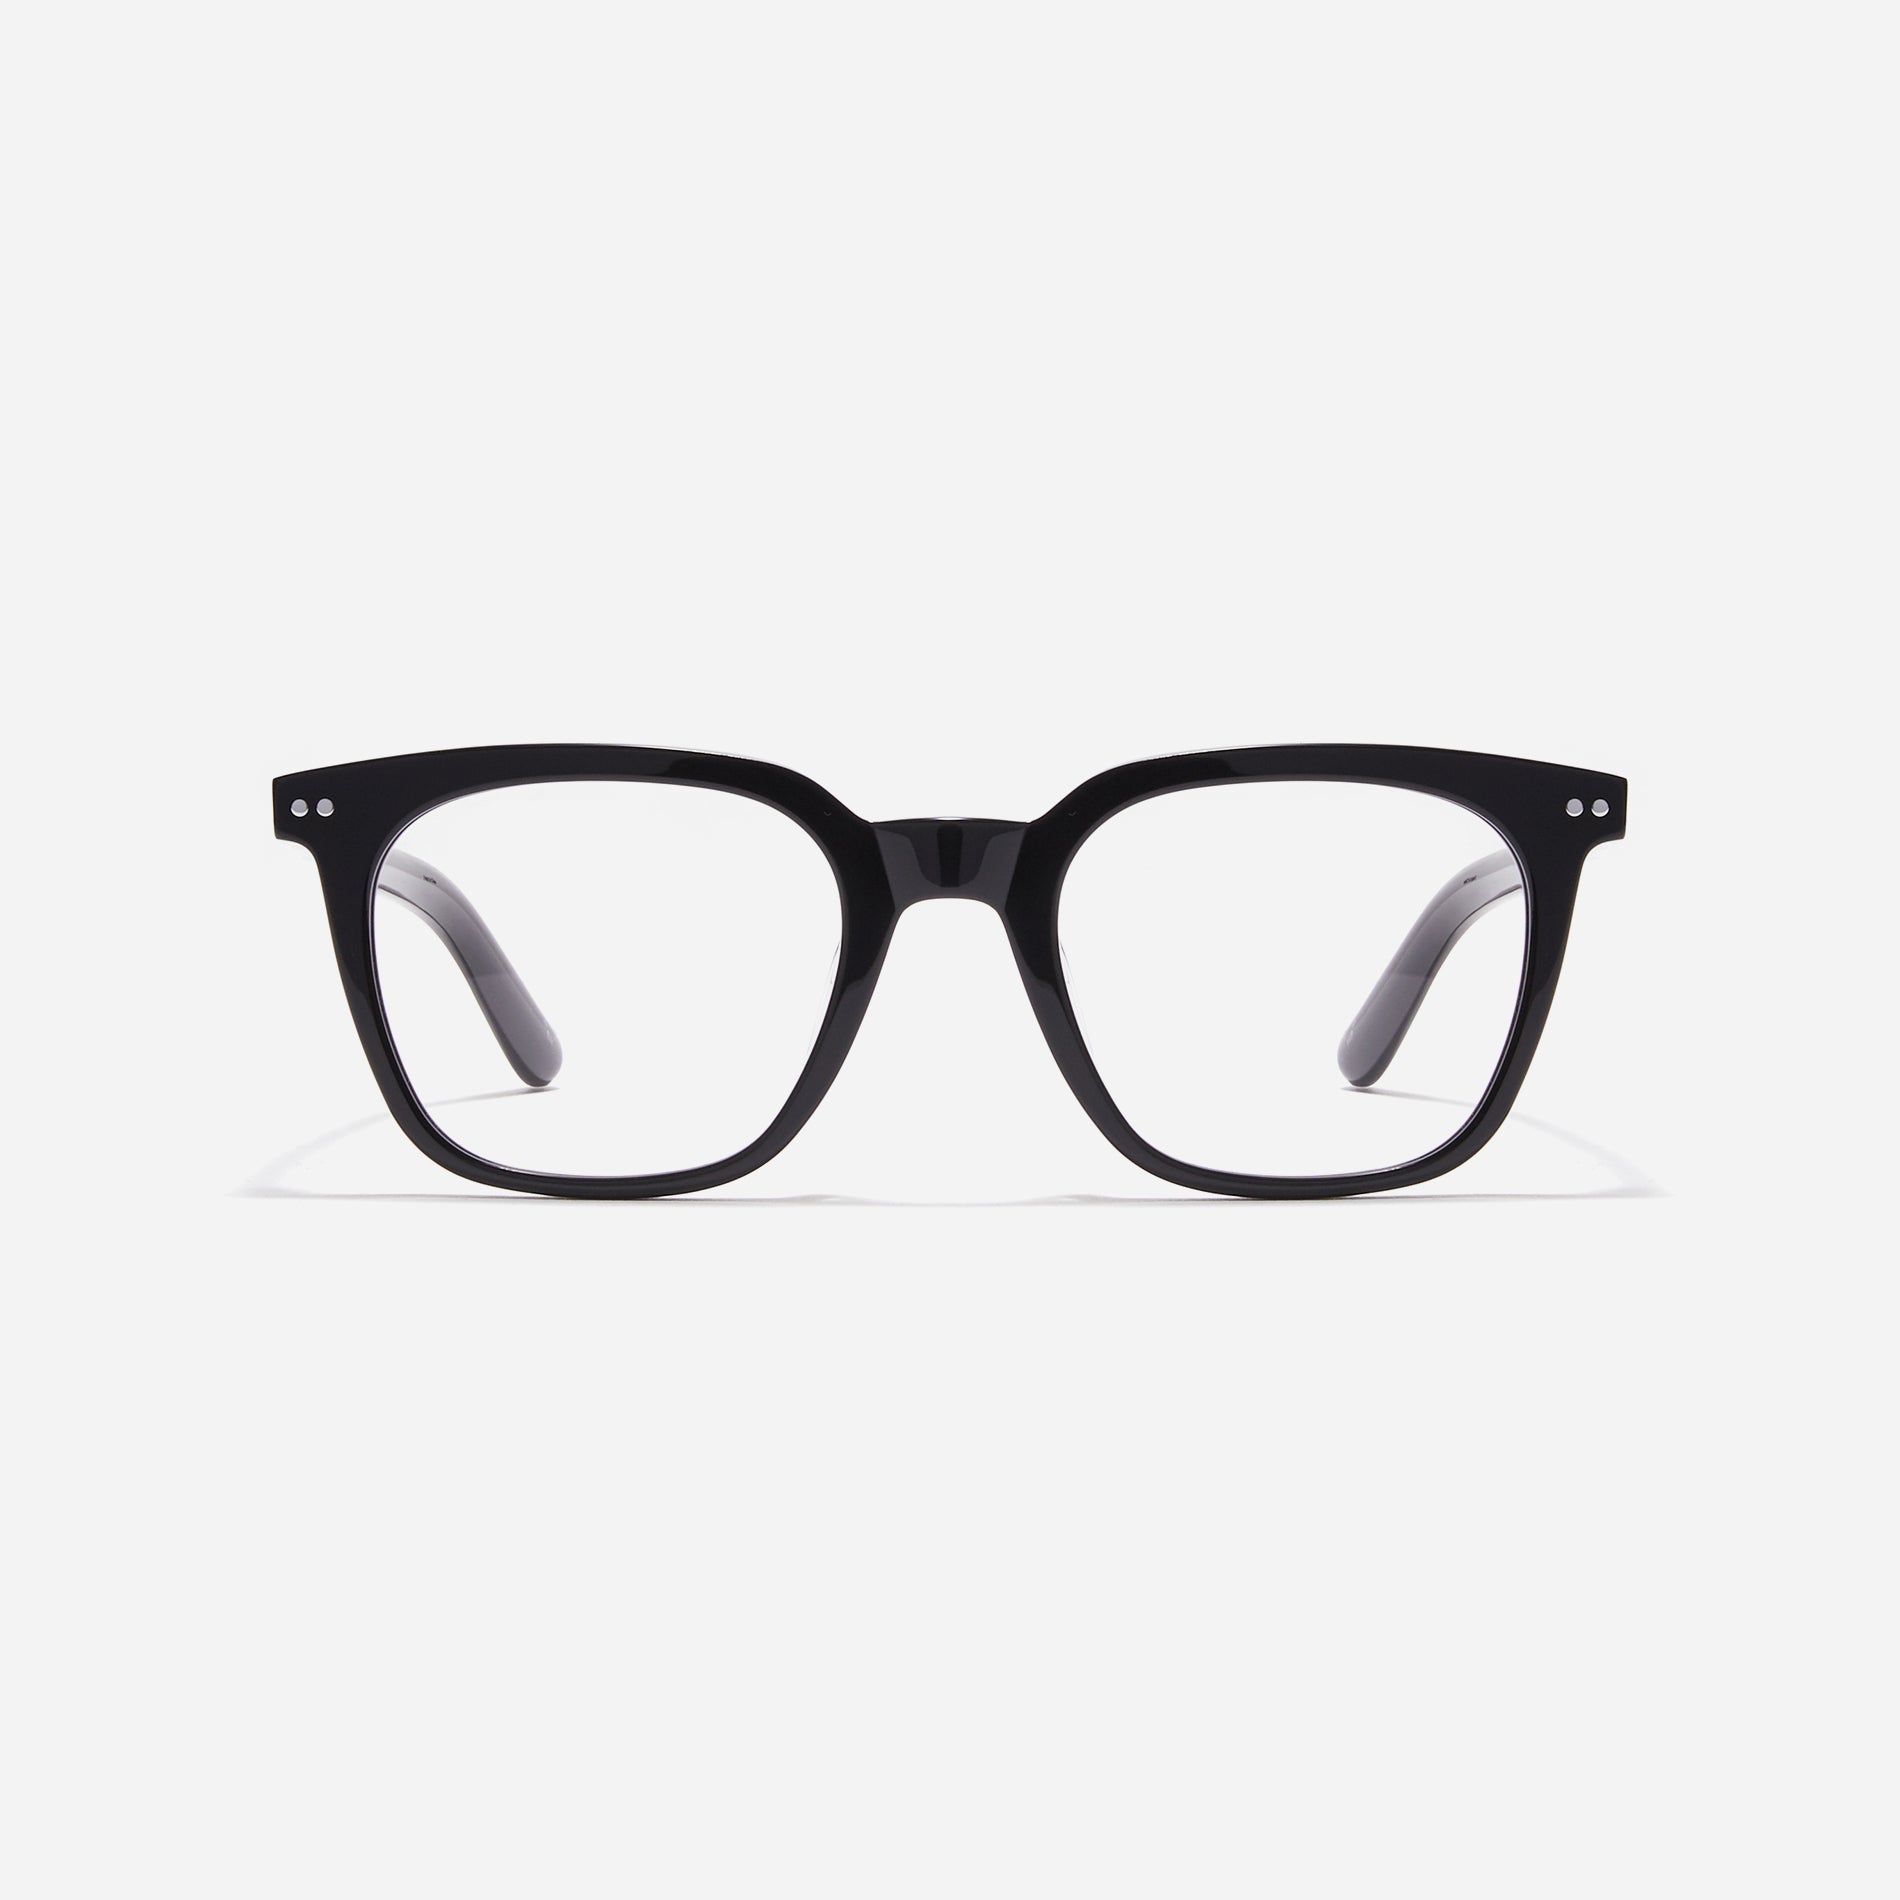 Square-shaped horn-rimmed eyeglasses. Embodying a modern reinterpretation of '91s retro vibes, their design is created for effortless styling.